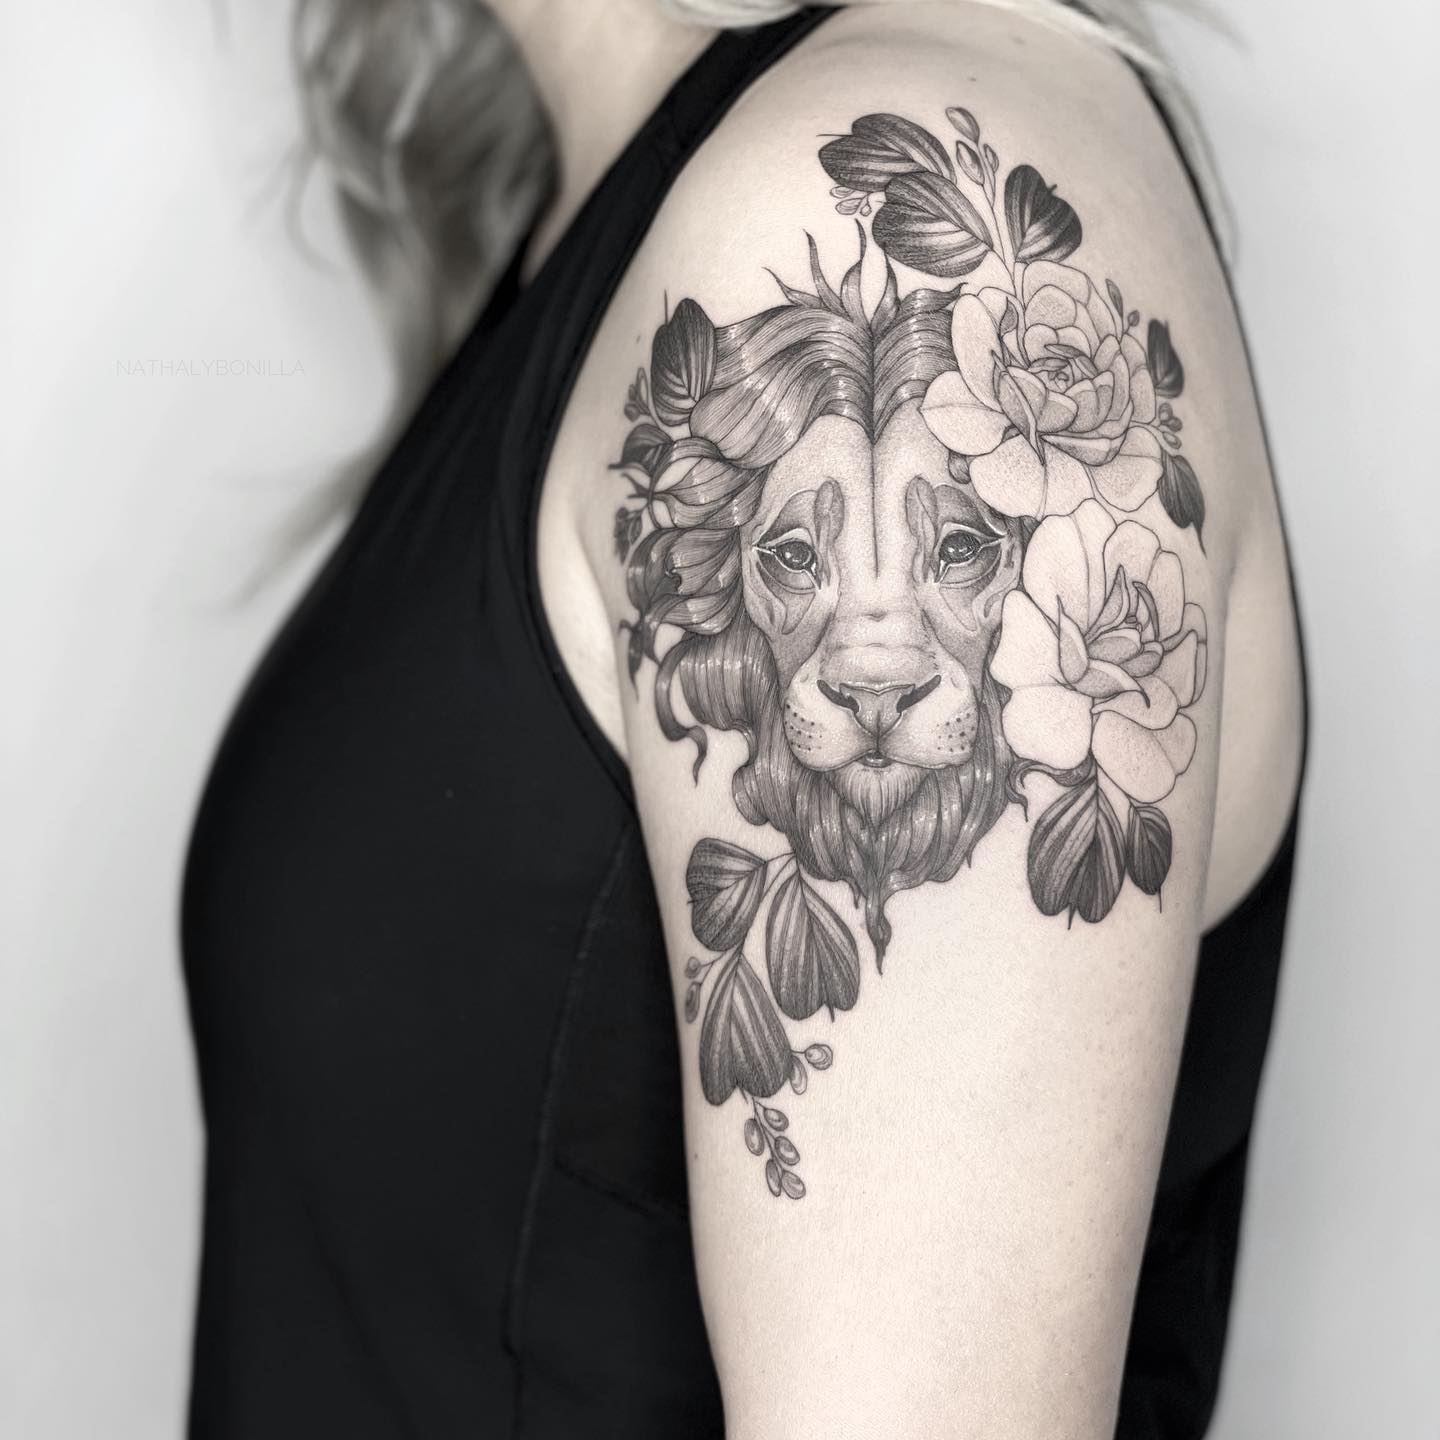 A Majestic Lion Surrounded by Ornate Florals Tattoo